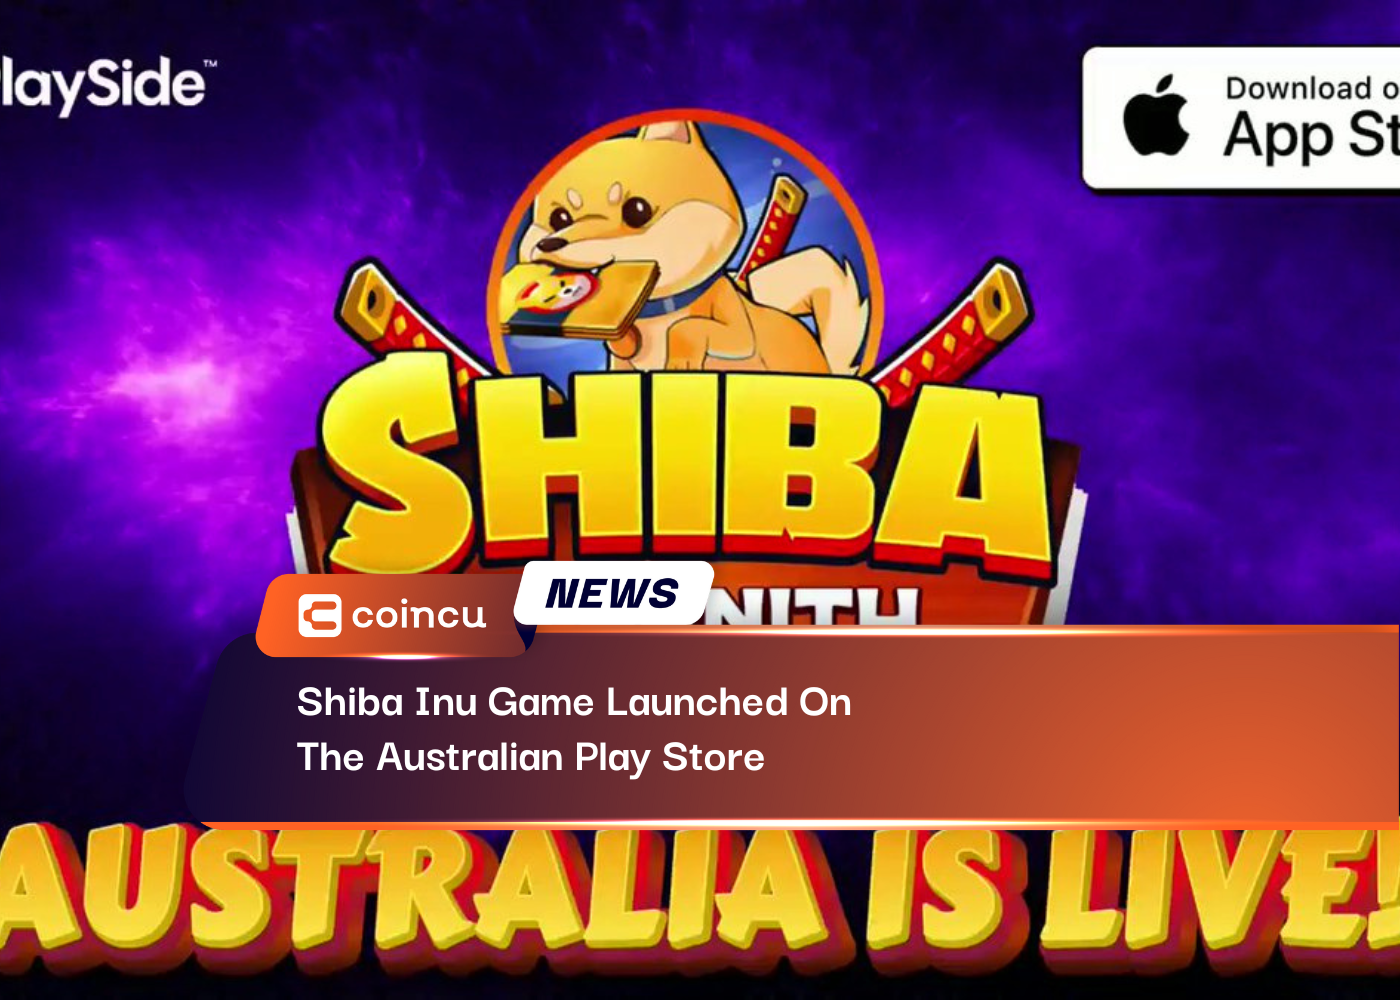 Shiba Inu Game Launched On